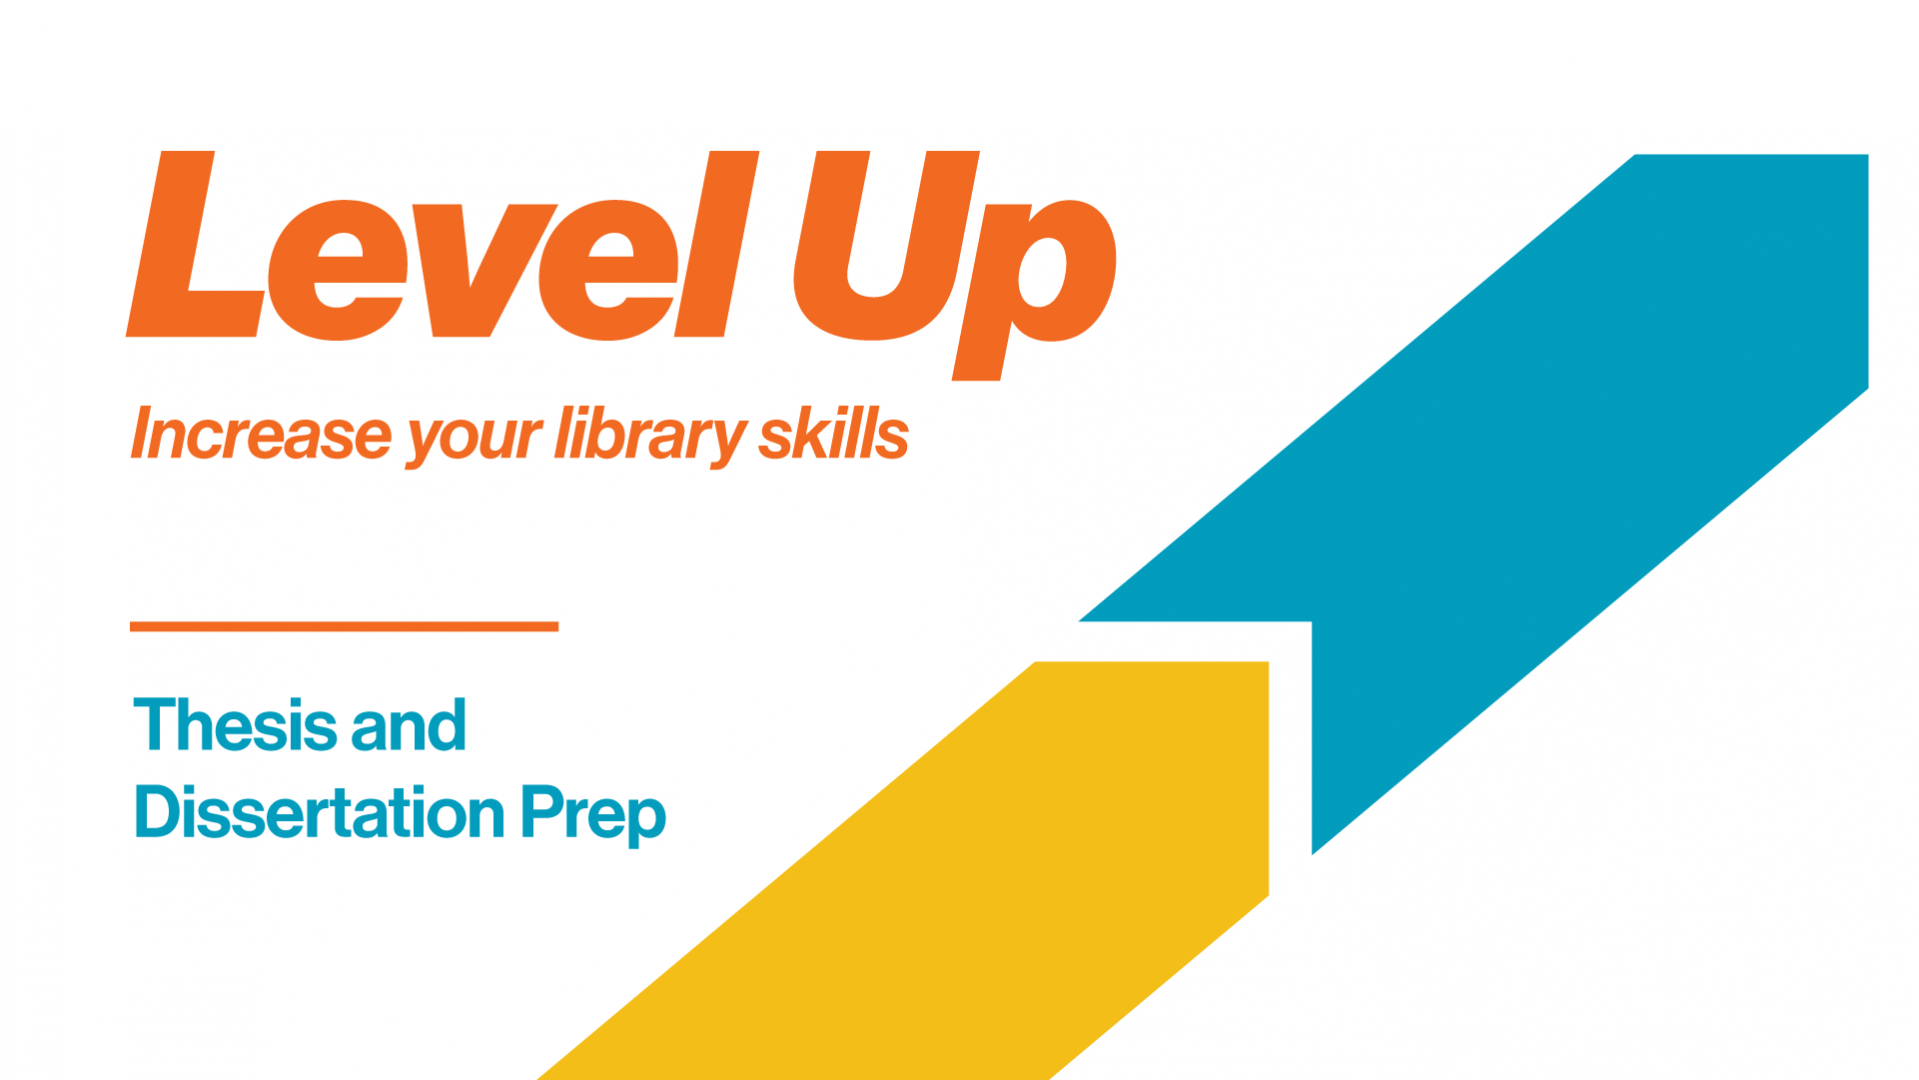 Level Up: Increase your library skills with thesis and dissertation prep